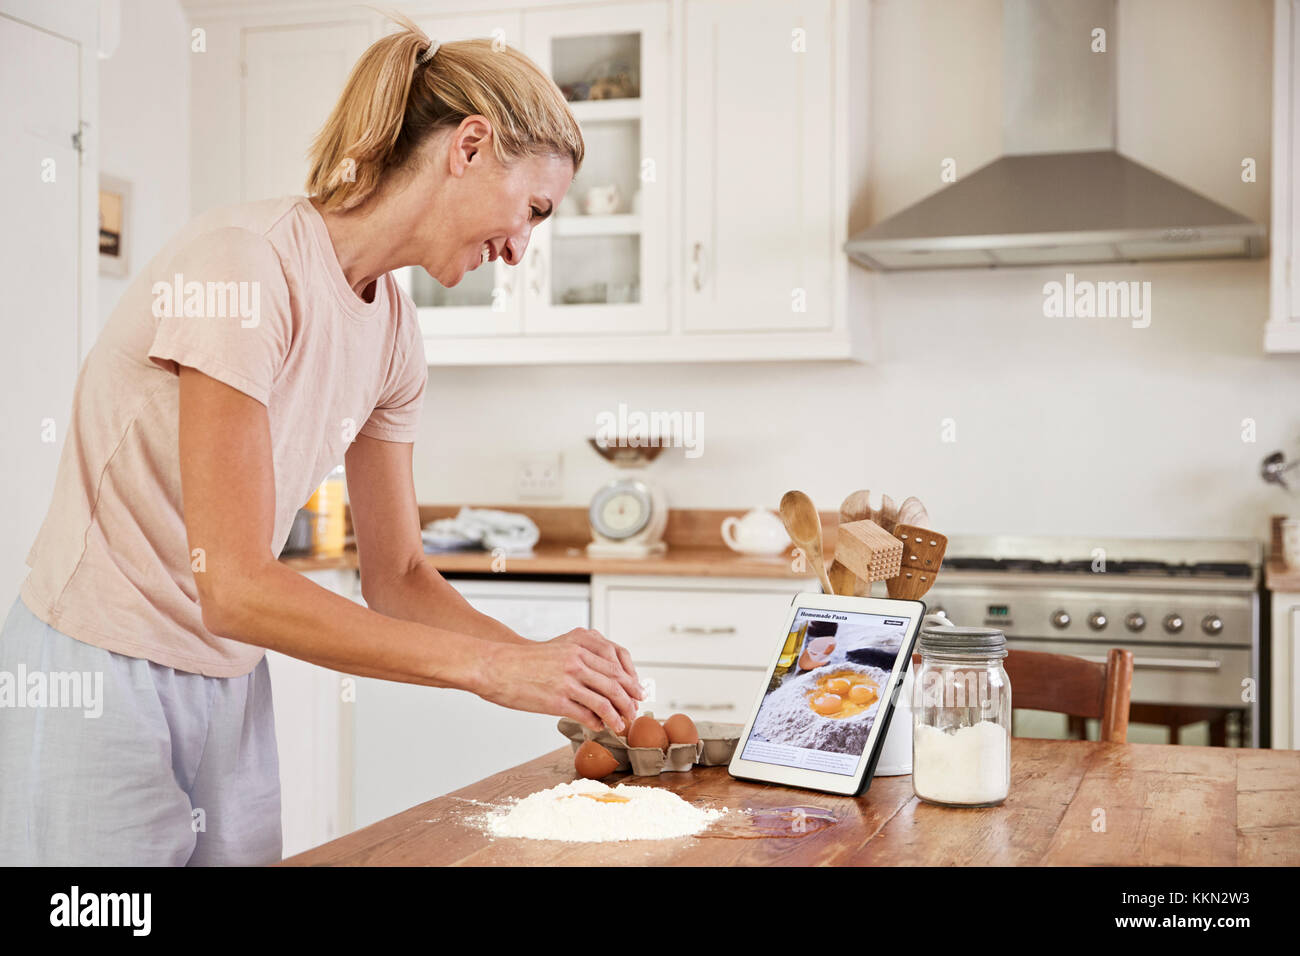 Woman Following Recipe On Digital Tablet In Kitchen Stock Photo - Alamy